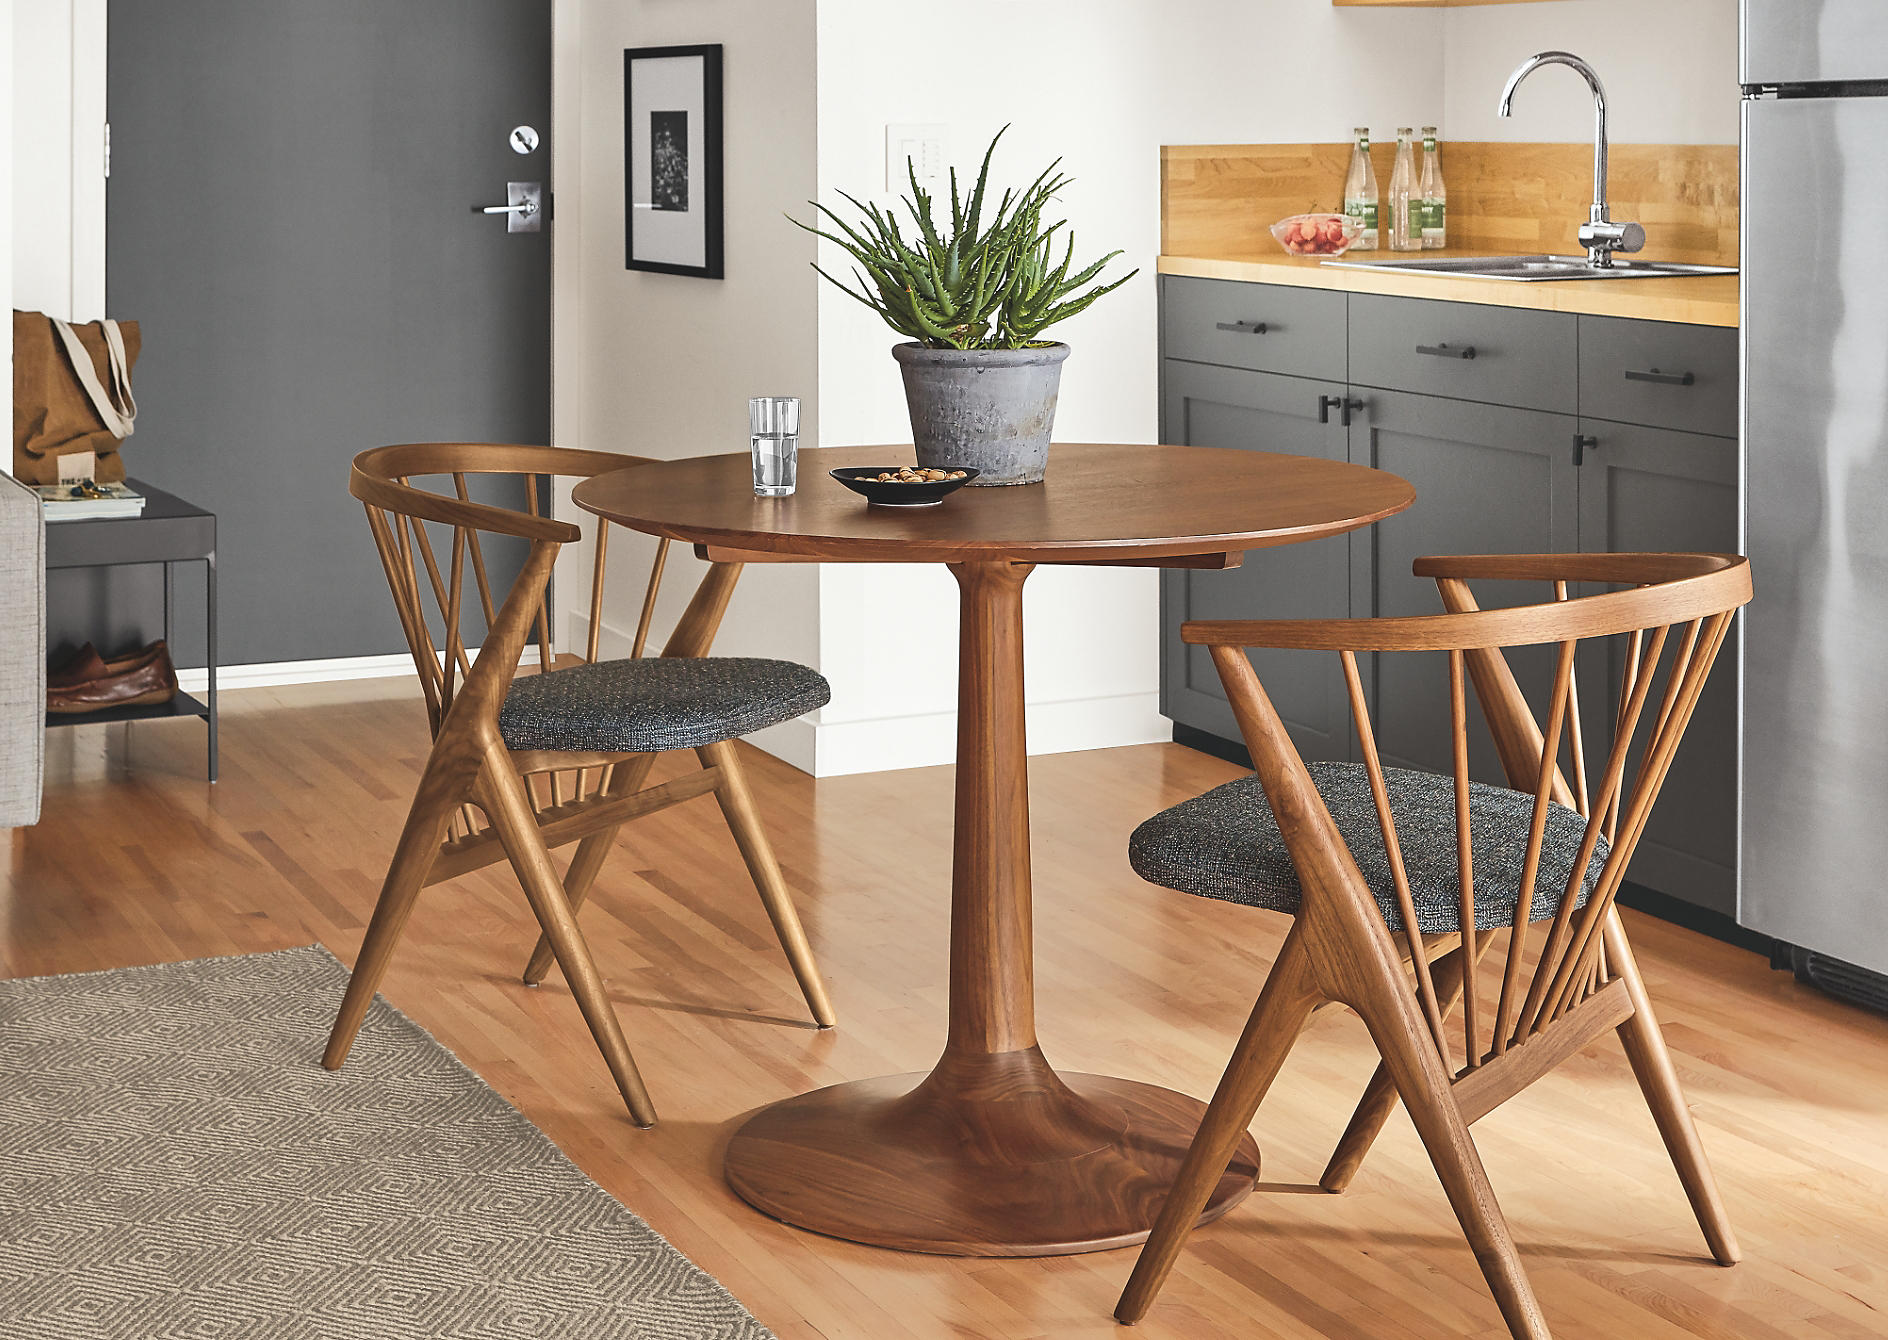 dining tables & chairs for small spaces - ideas & advice - room